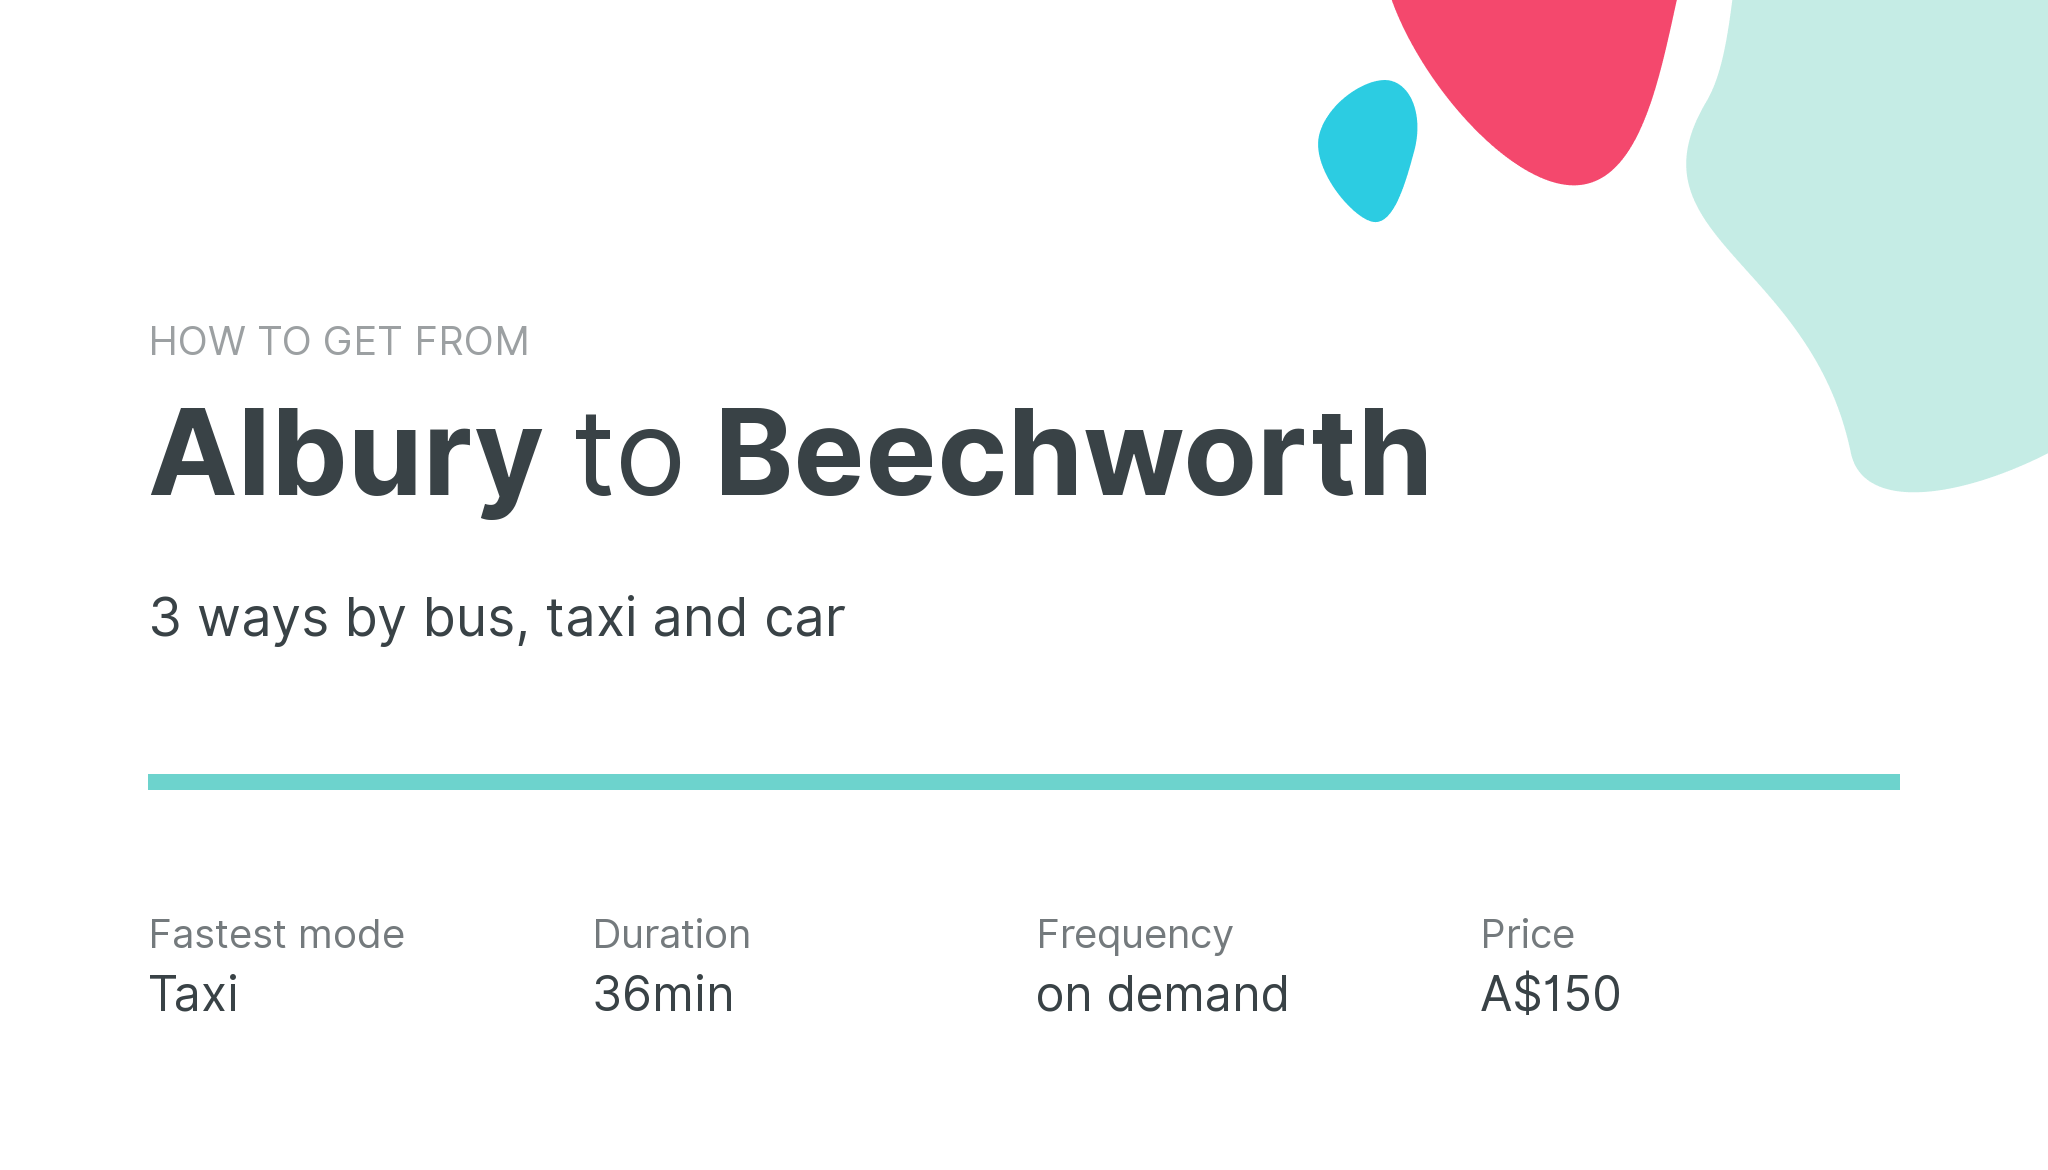 How do I get from Albury to Beechworth